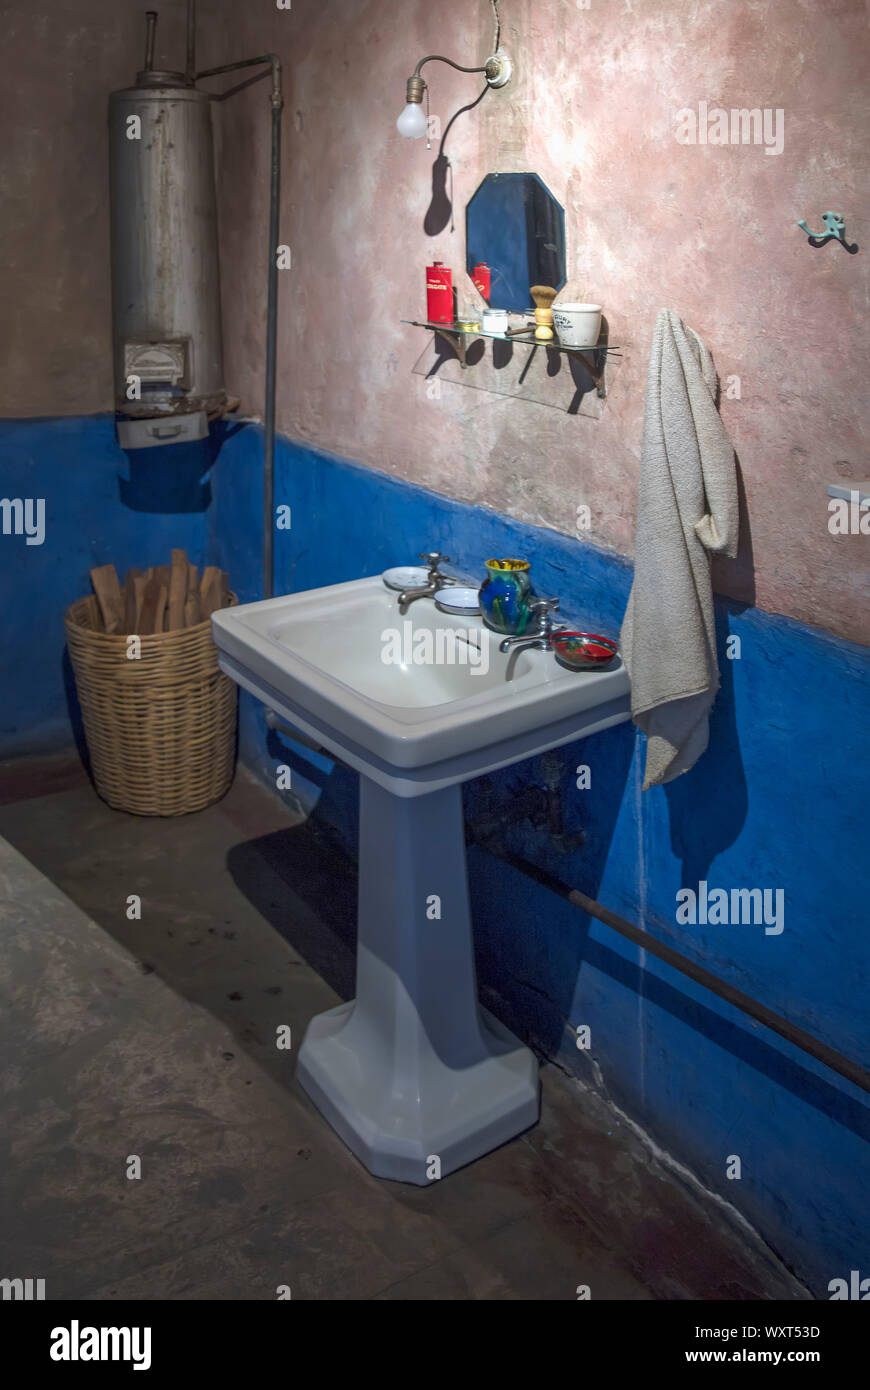 Leon Trotsky's bathroom in his house in Coyoacan, Mexico City, Mexico Stock Photo